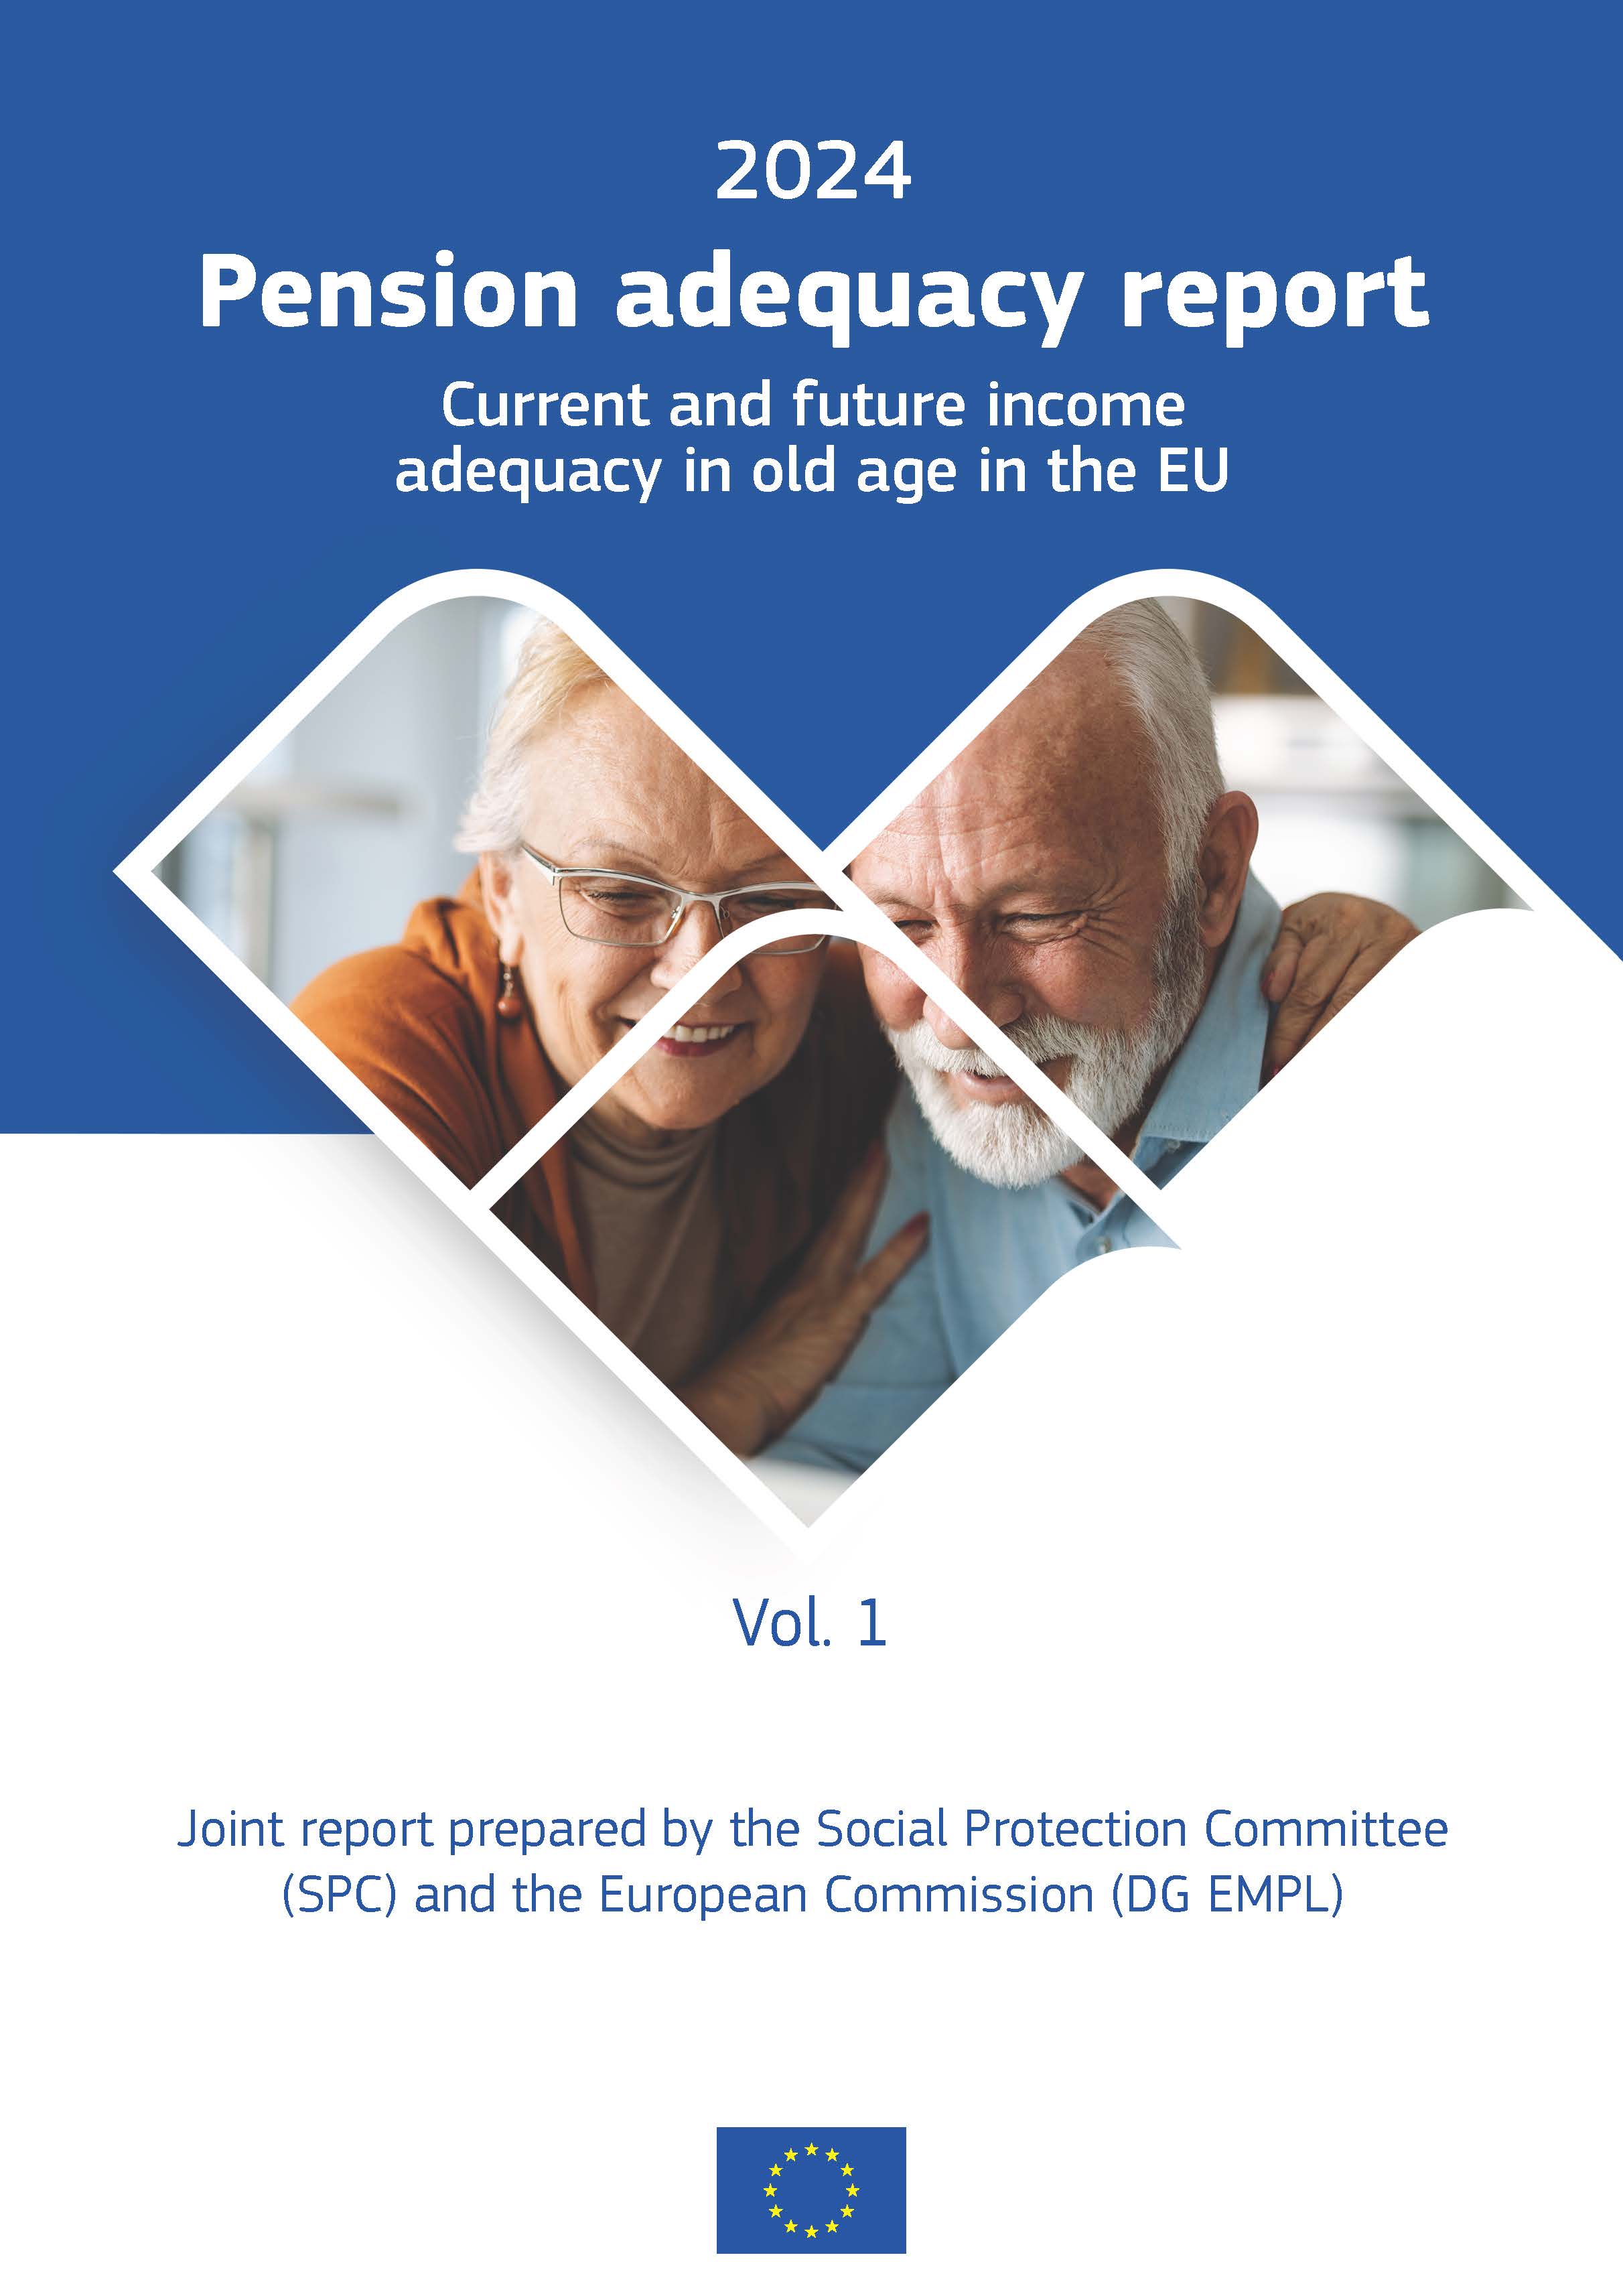 Pension adequacy report - Current and future income adequacy in old age in the EU